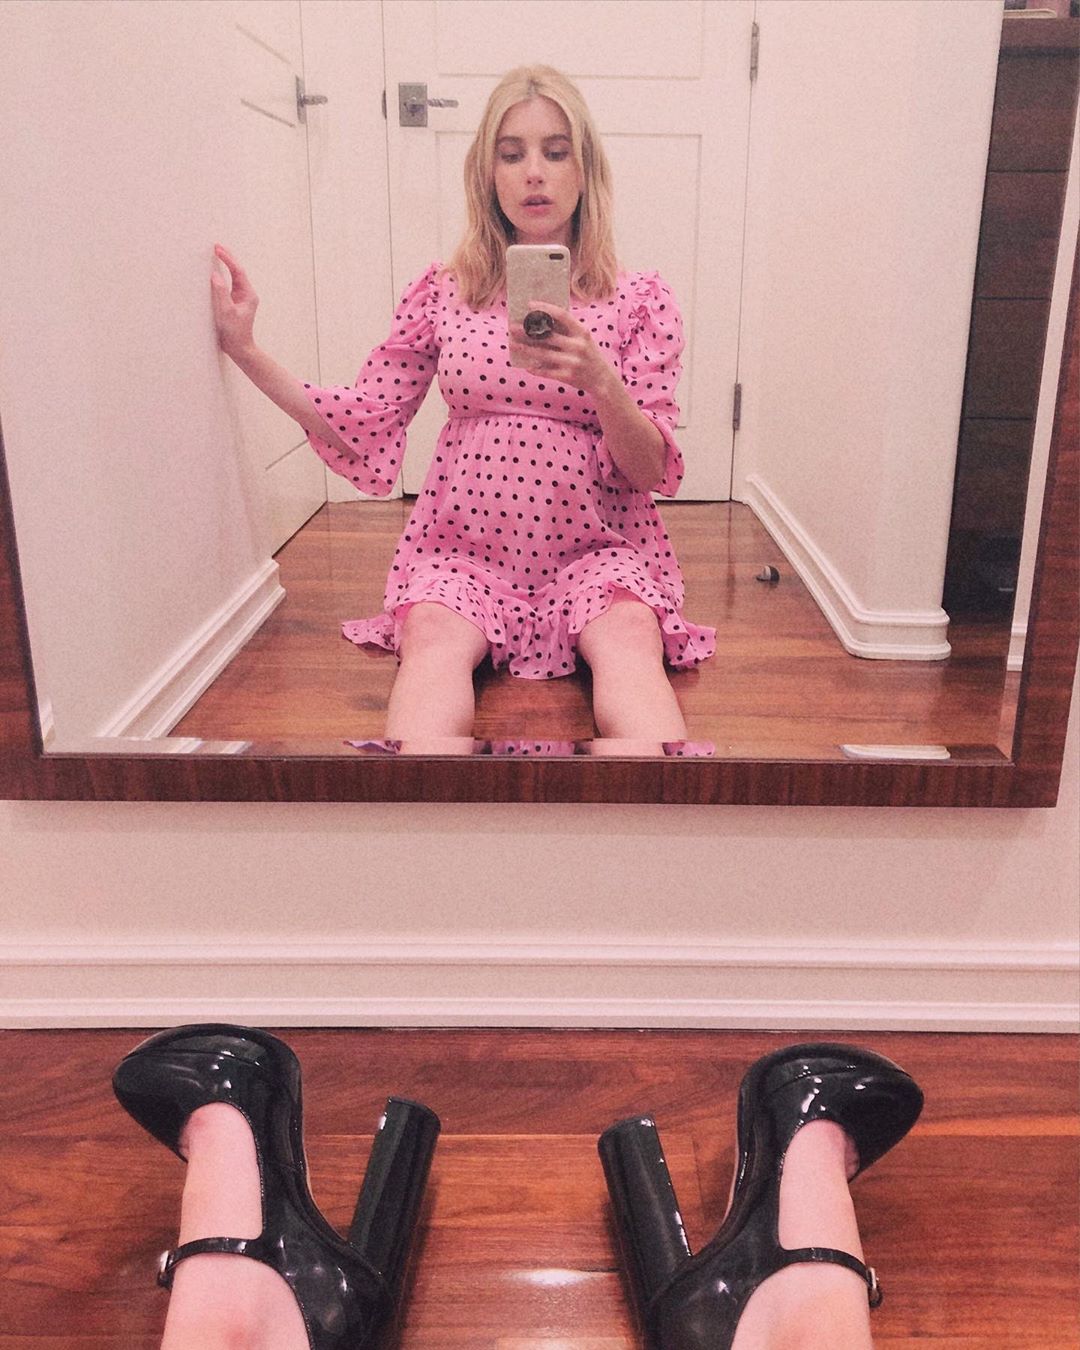 Emma Roberts’ Pregnancy Pics: See the Star’s Baby Bump Album Ahead of 1st Child With Garrett Hedlund